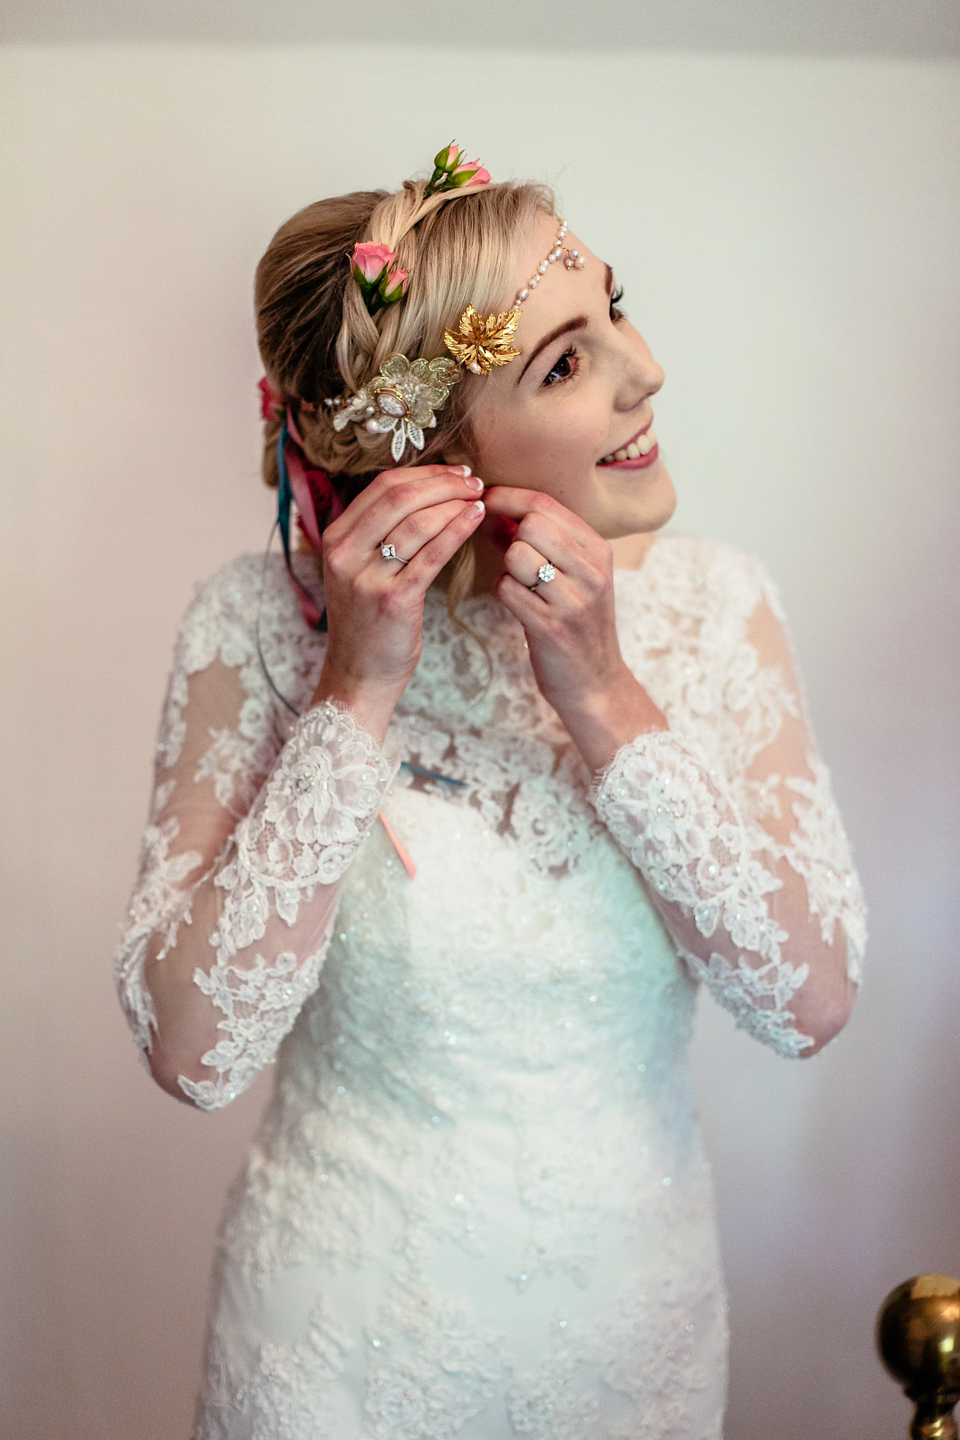 Lucy wore an Ellis Bridals gown for her quirky and colourful outdoor wedding. Photography by Cassandra Lane.